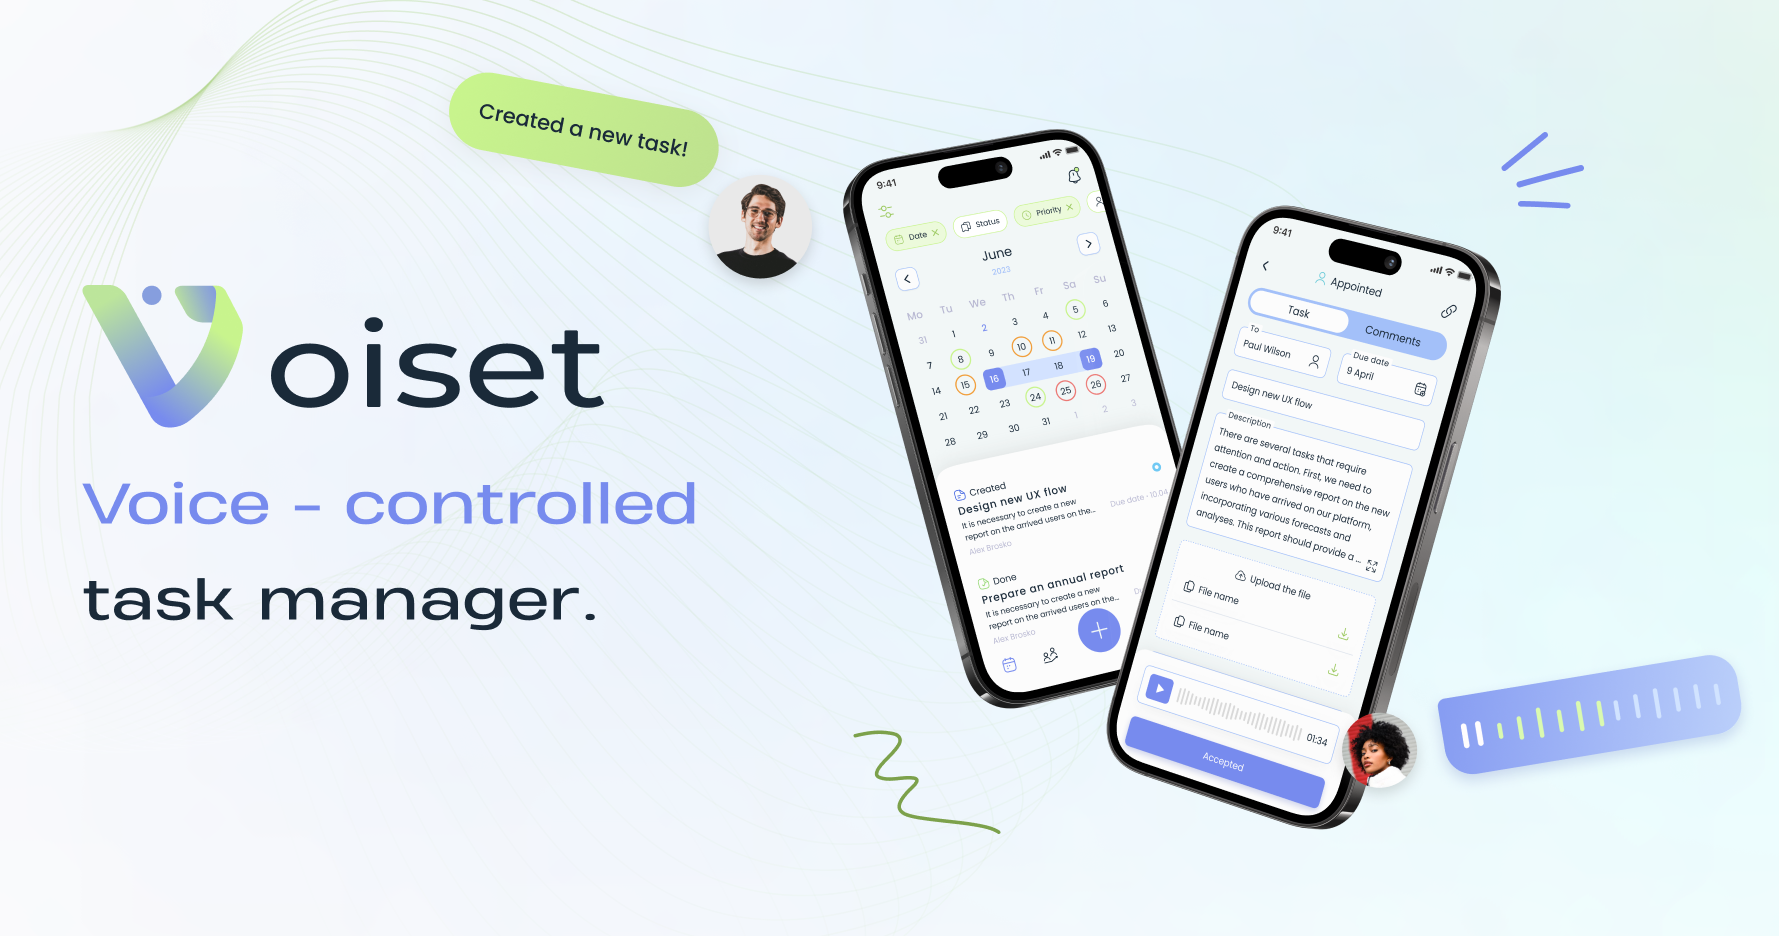 The Company "Union Smart Technology" Has Developed the Voiset App. Modern Task Manager Was Developed to Simplify Creating and Managing Tasks.